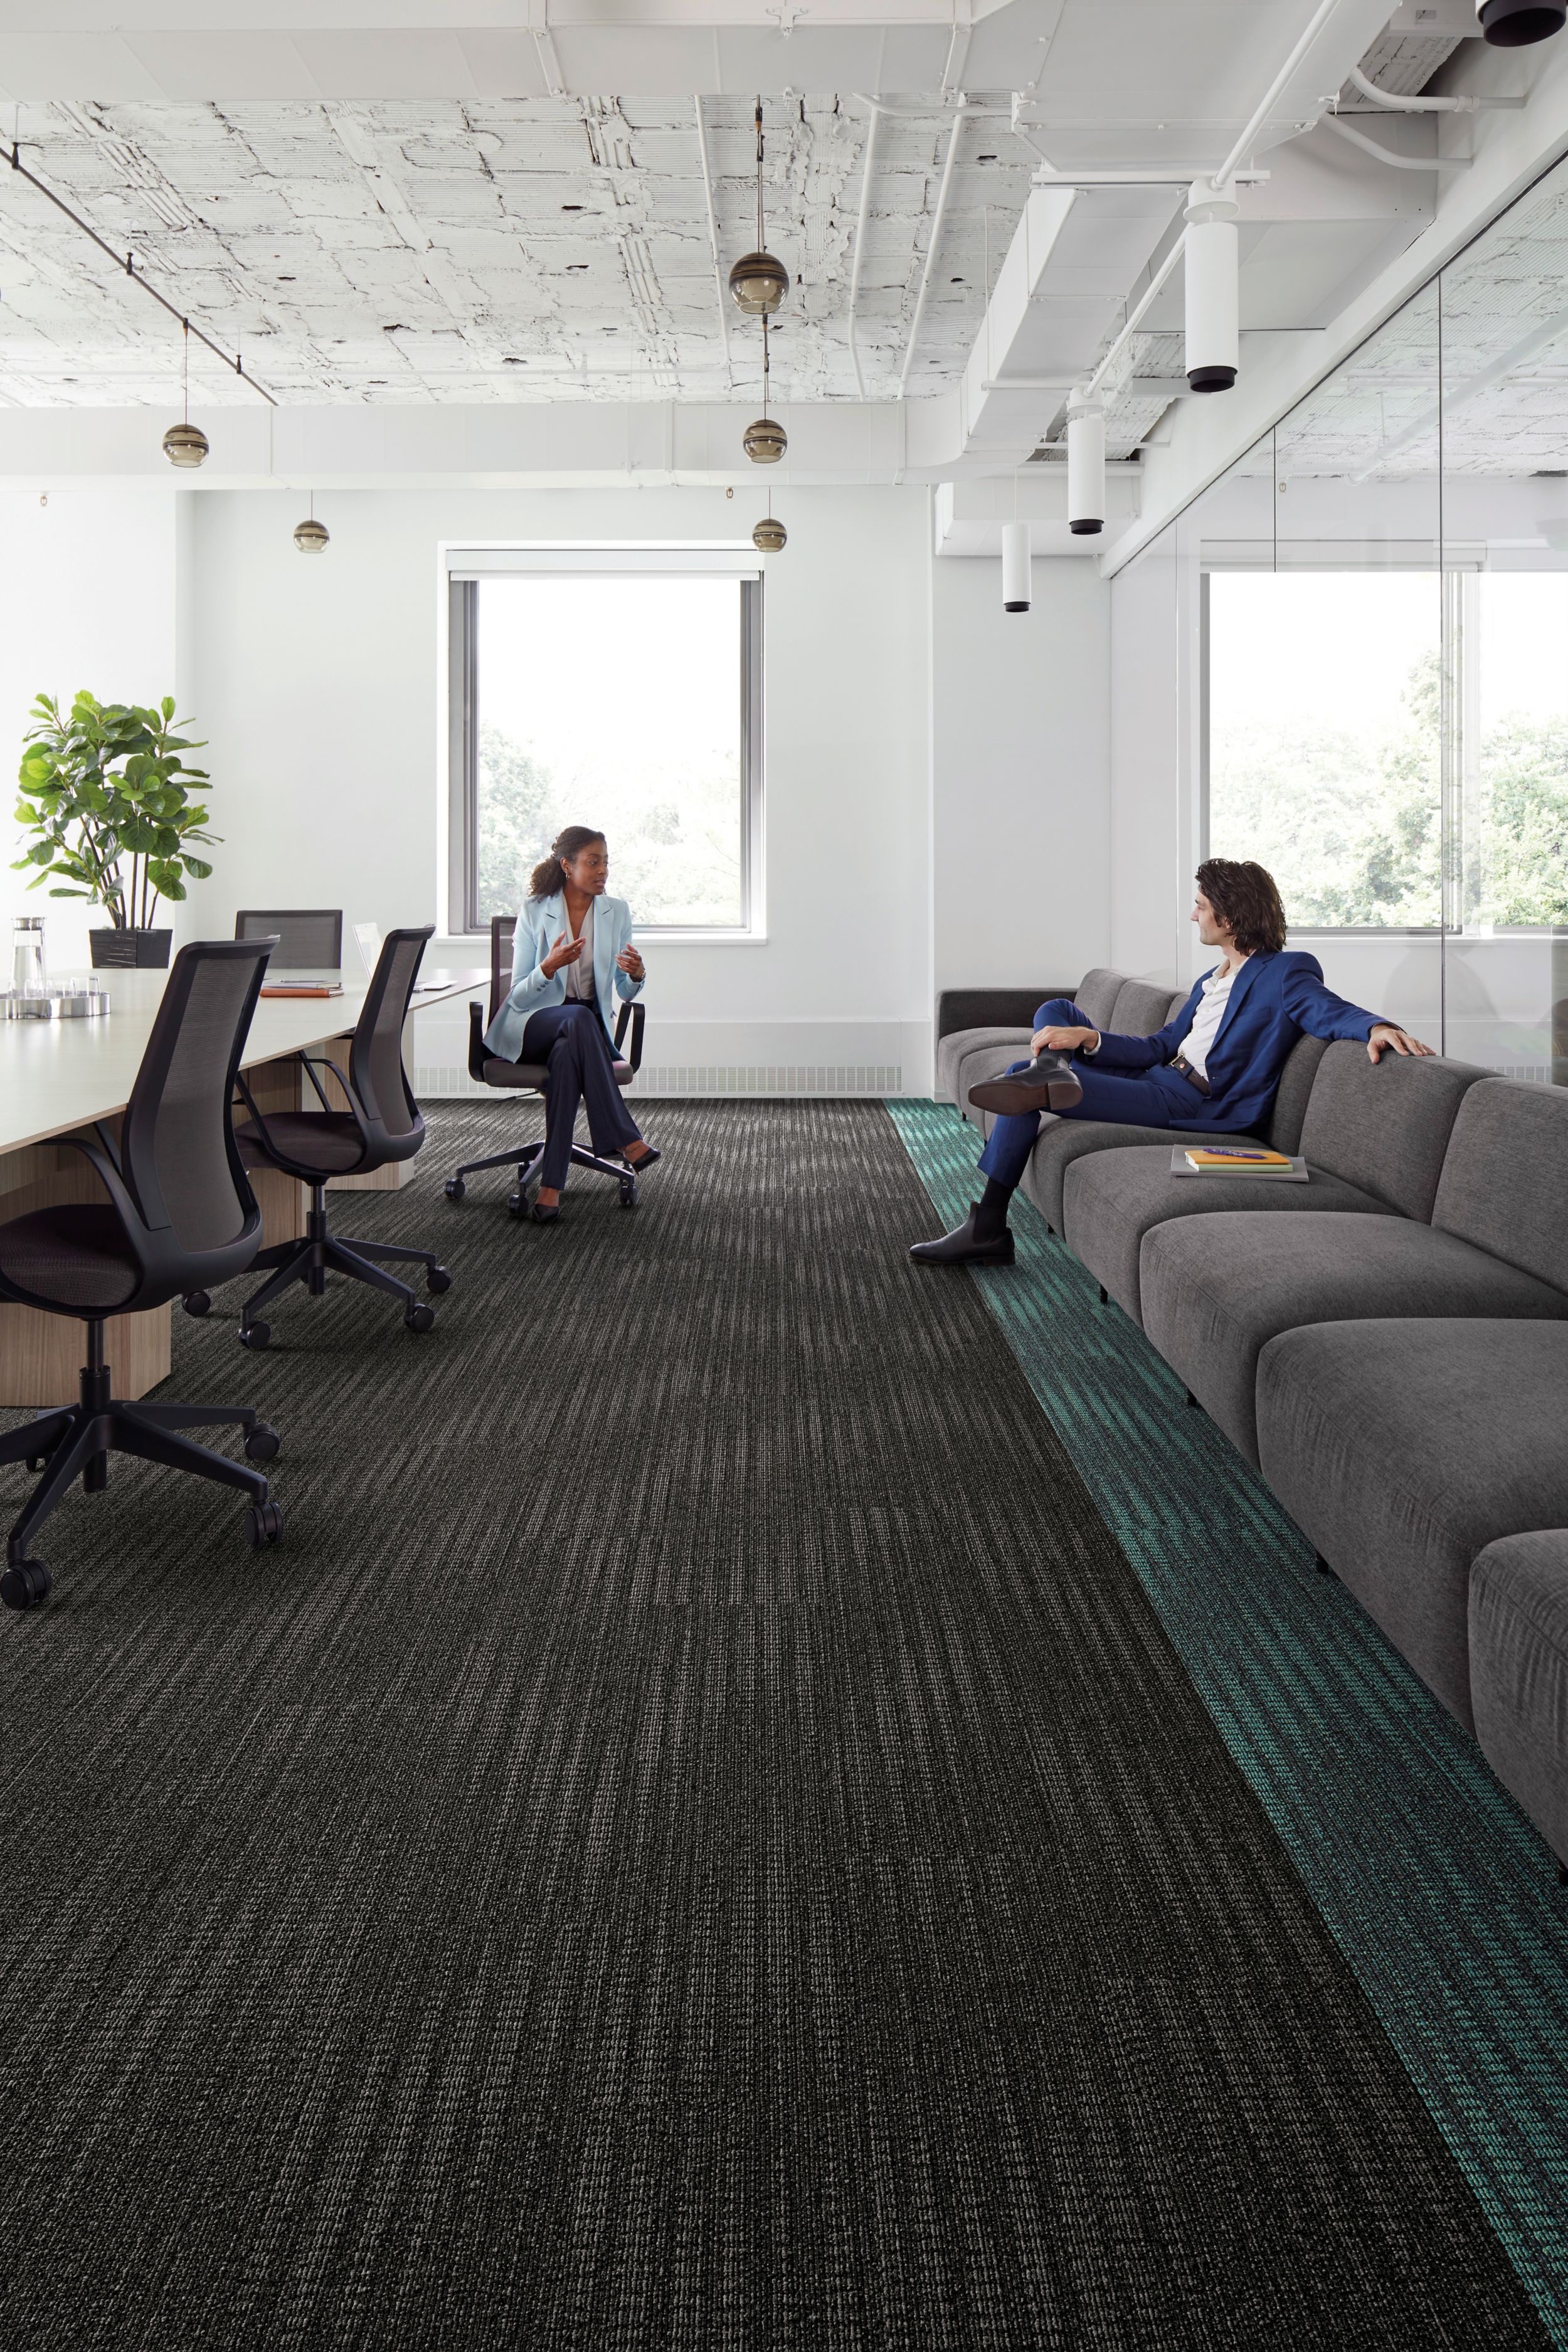 Interface Karmic Relief plank carpet tiles with man sitting on couch collaborating with woman in office chair image number 5